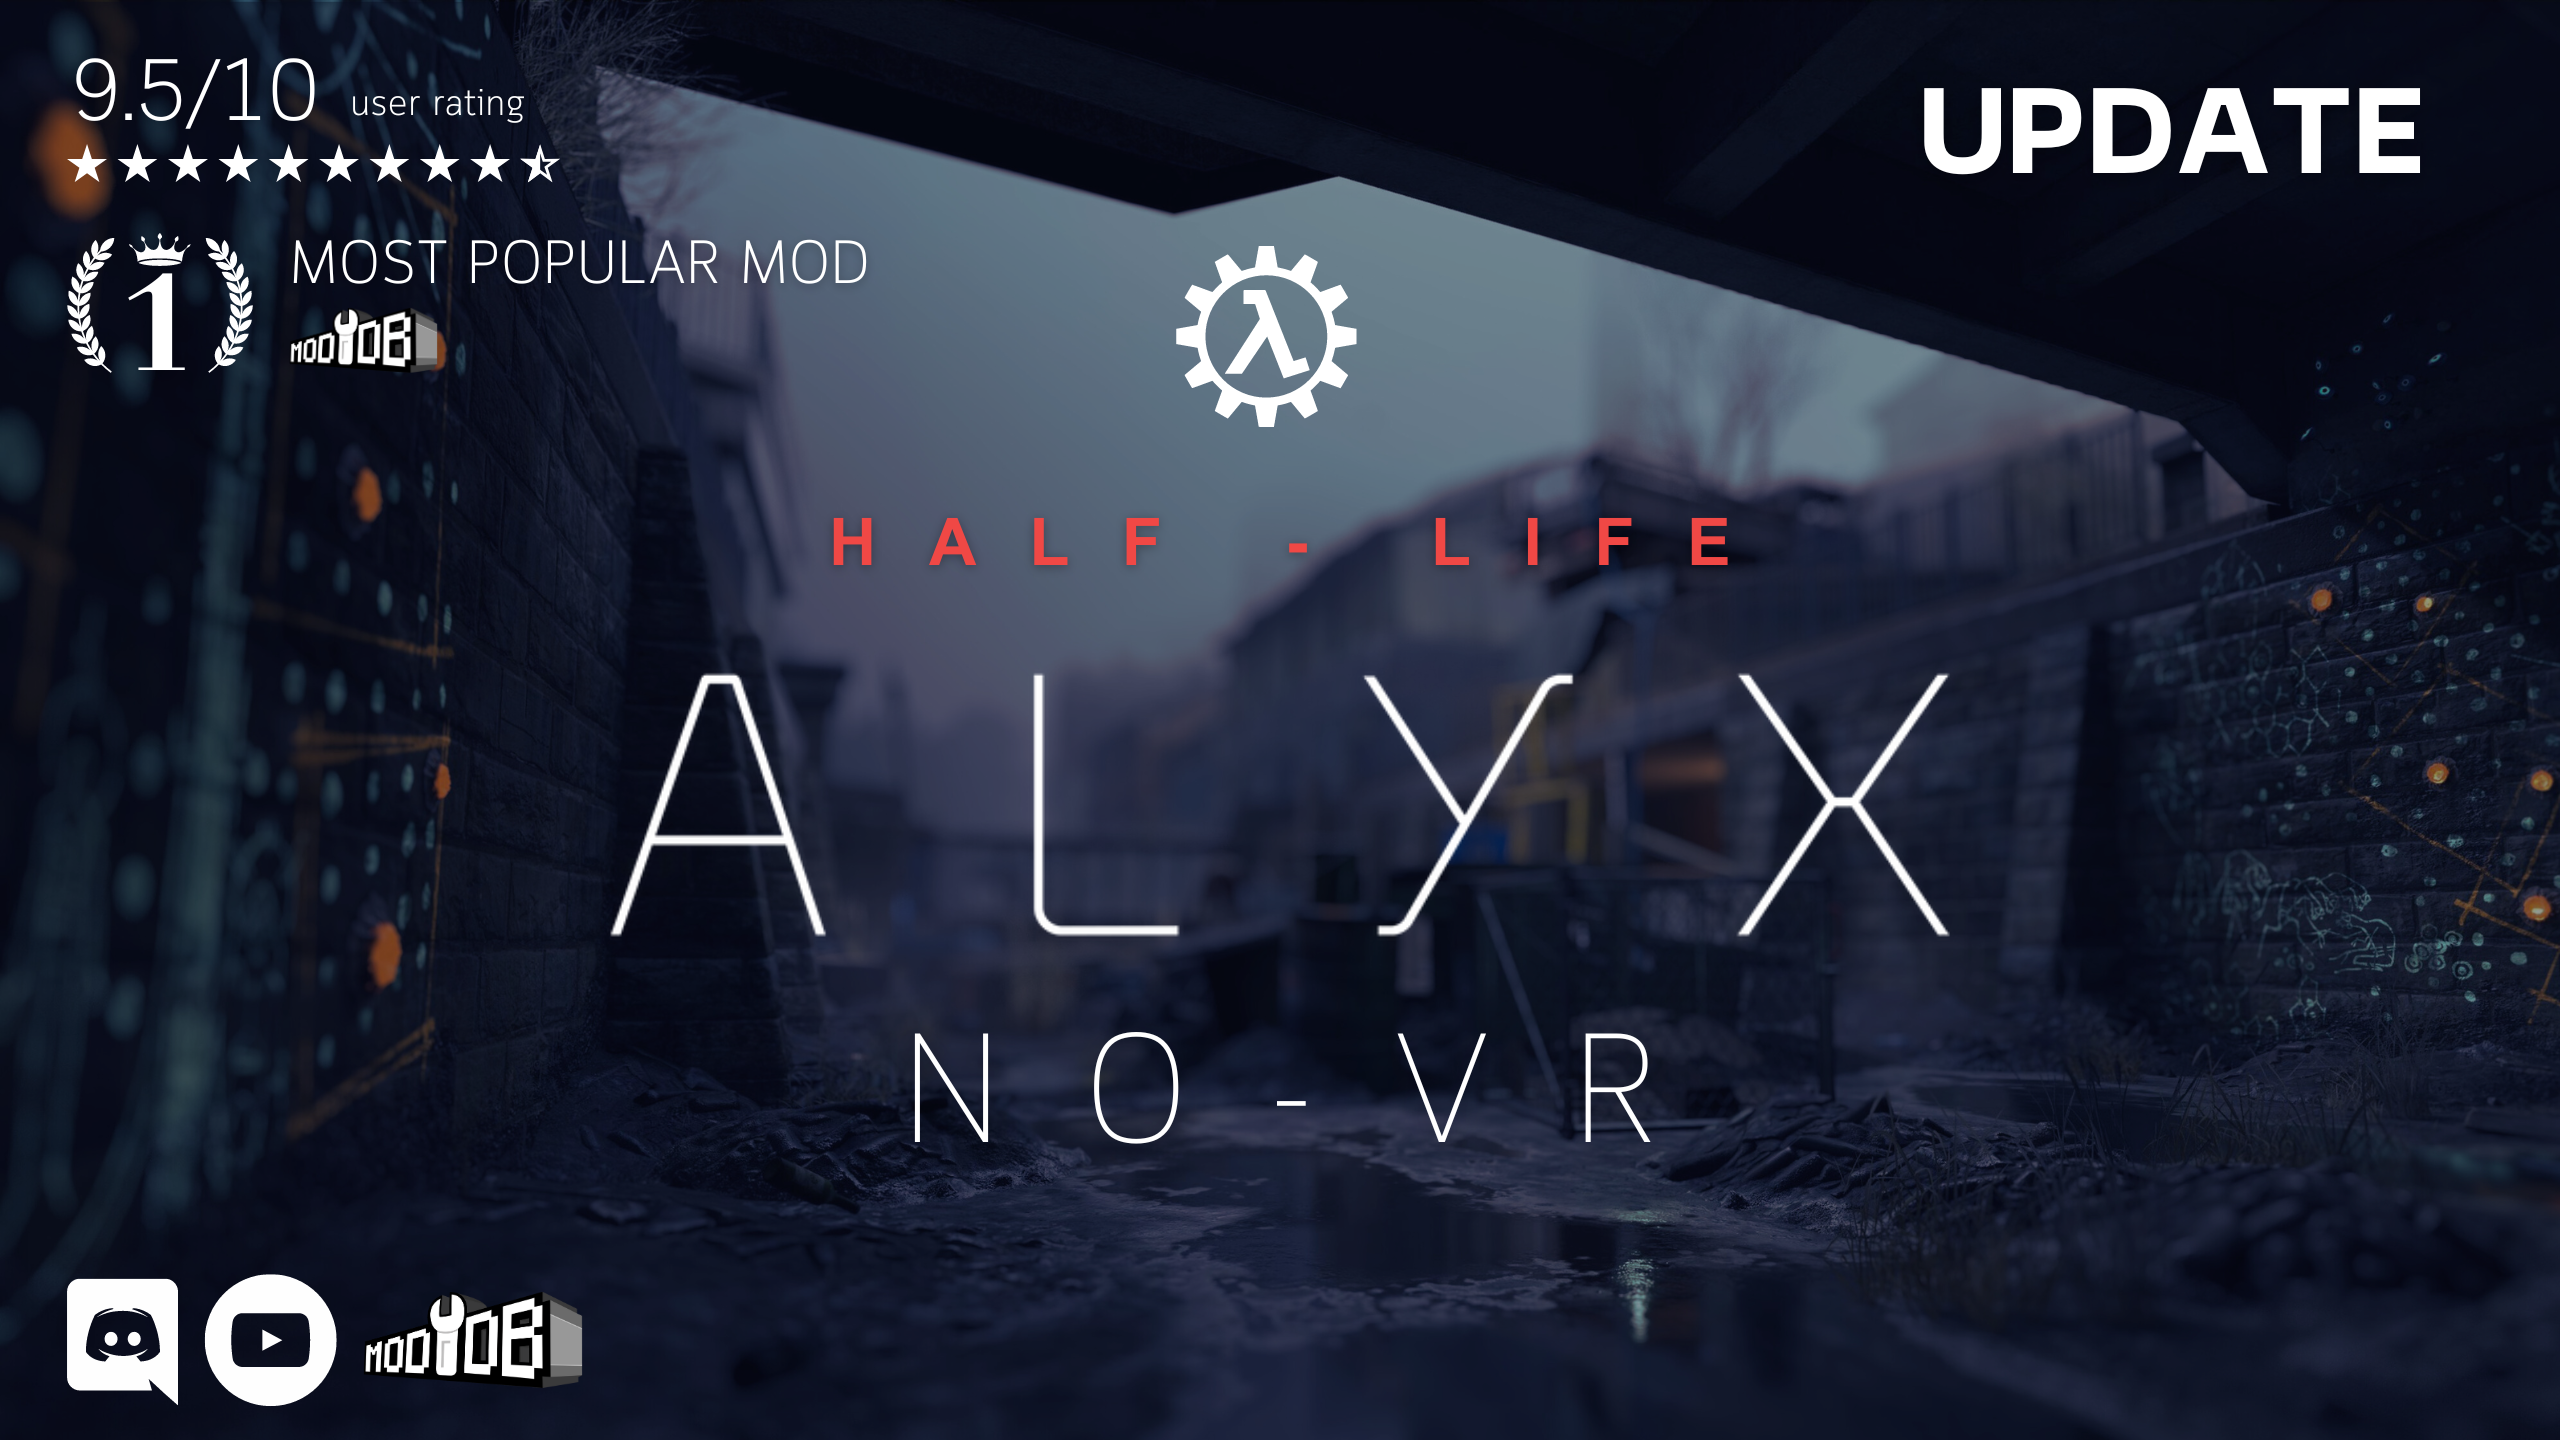 Play all of Half-Life: Alyx without VR thanks to this mod